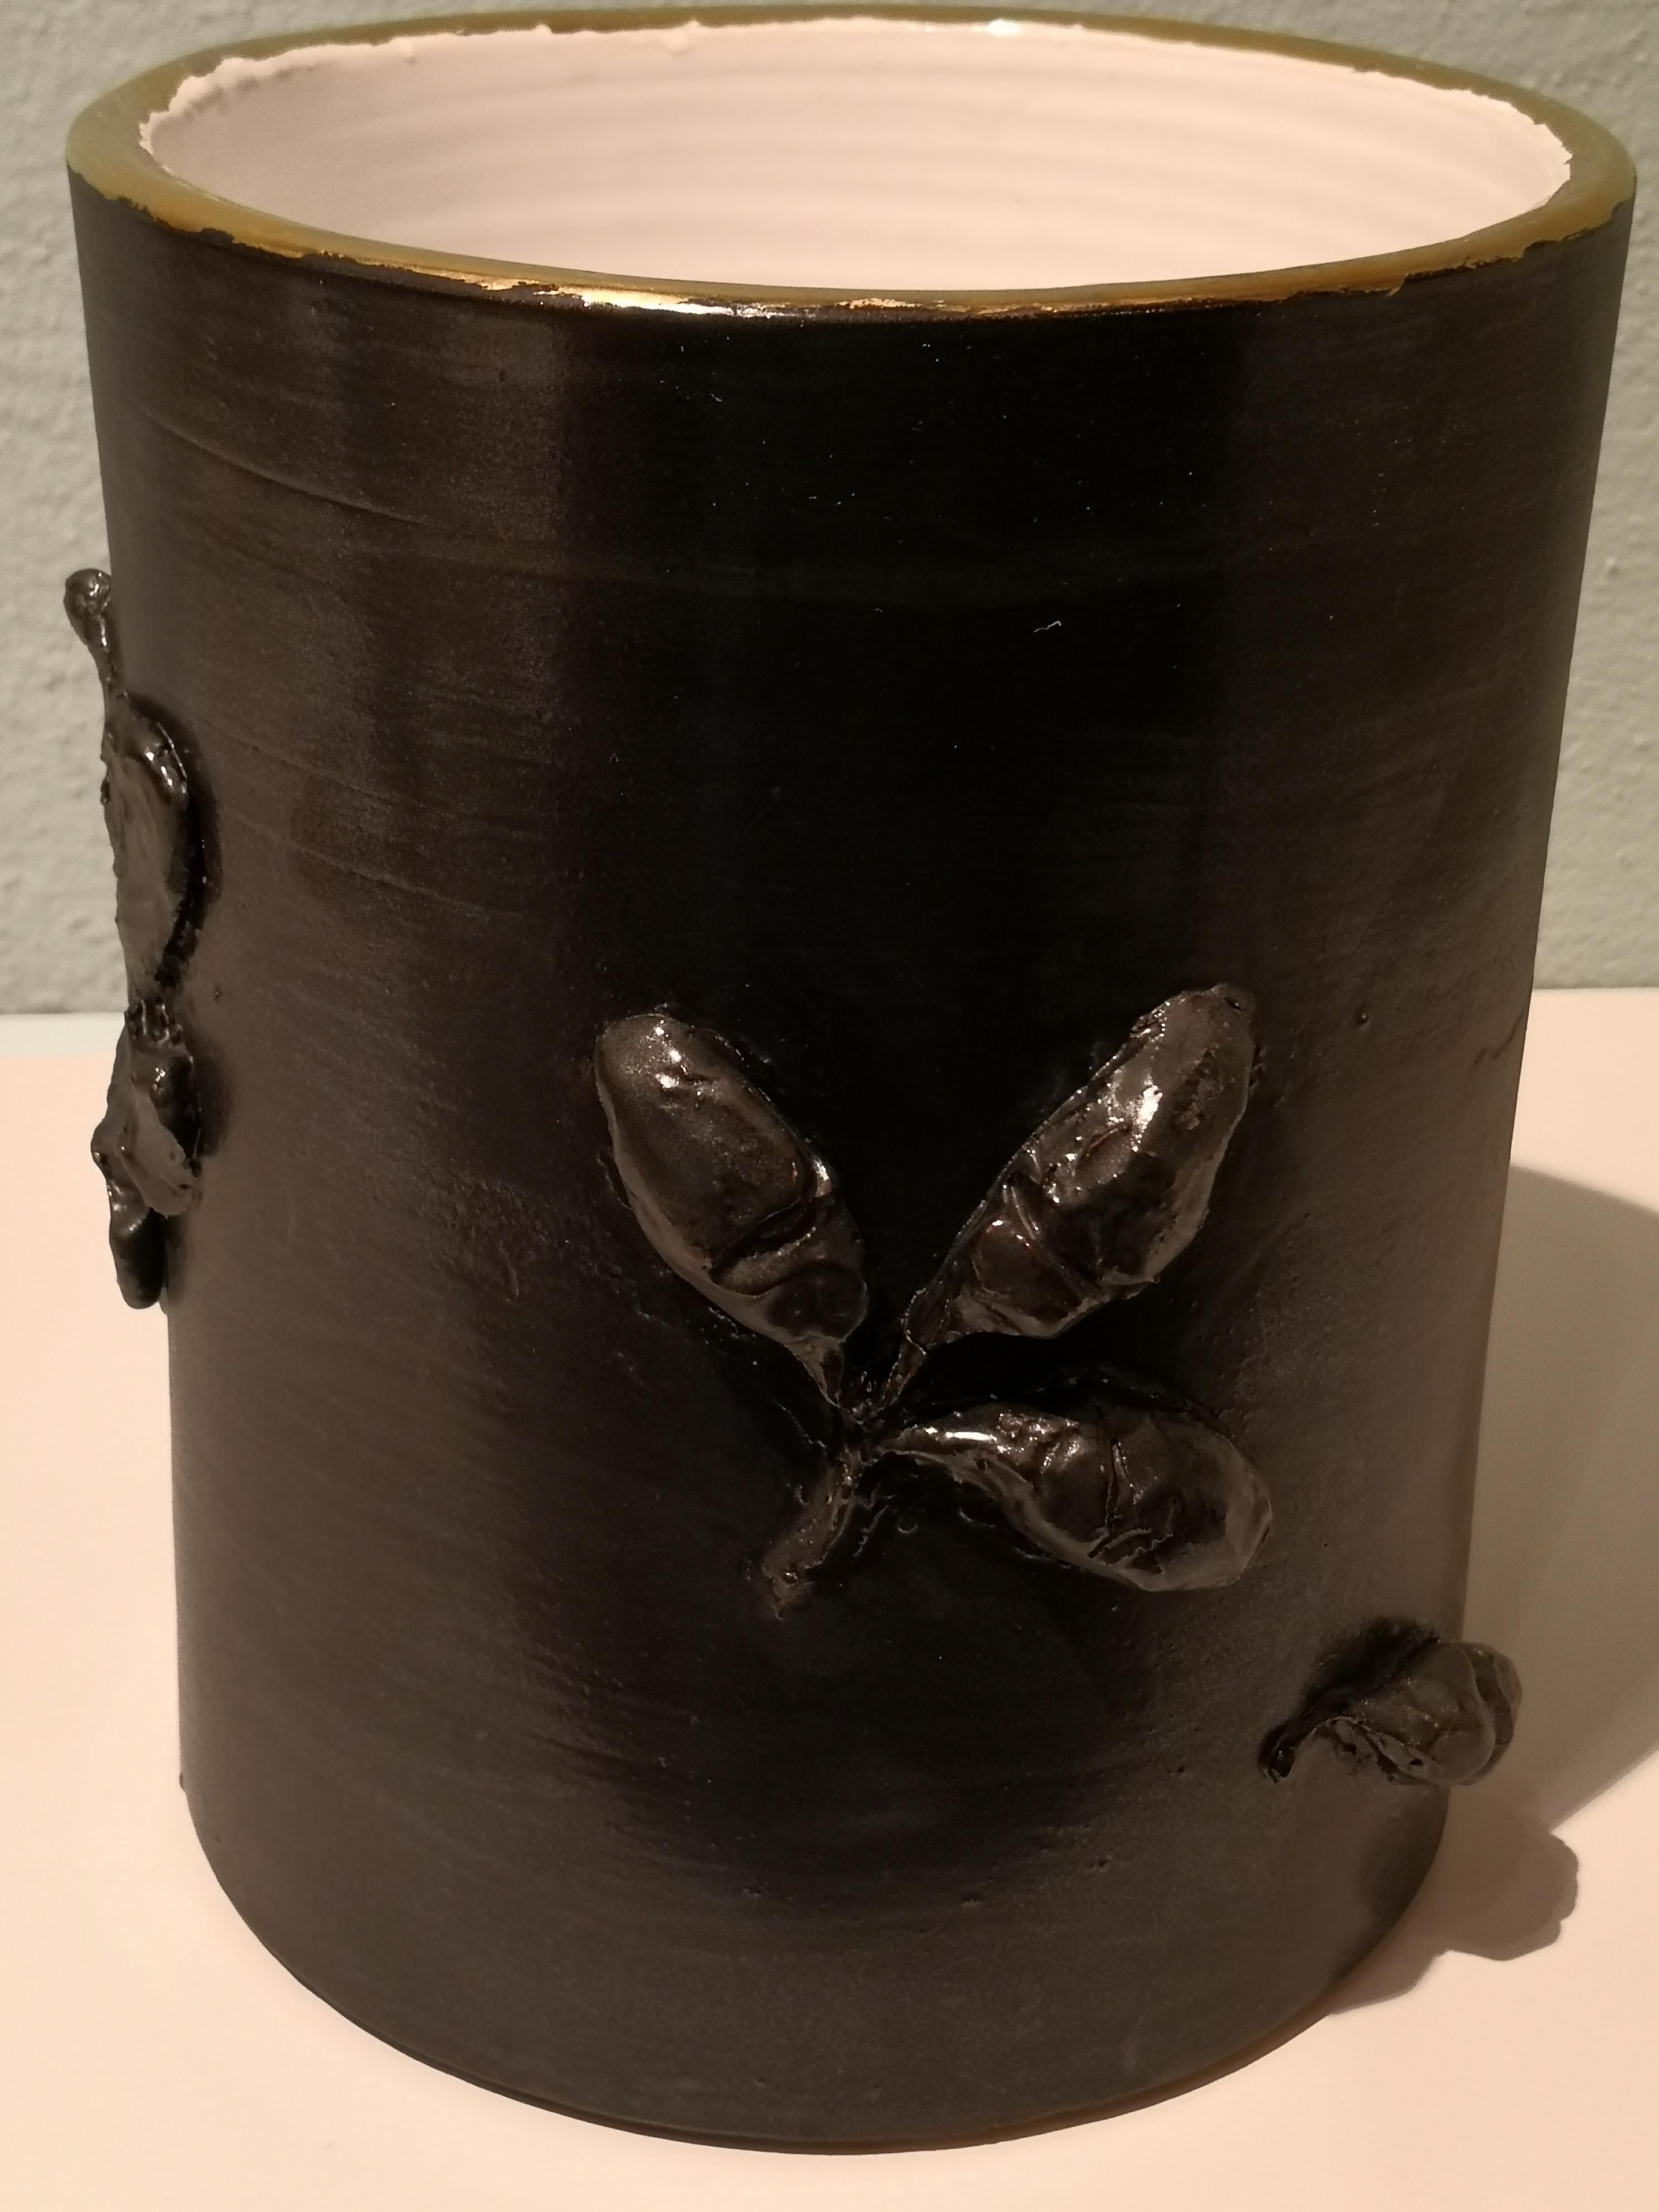 Entirely handmade pottery vase in black earthenware. Hands-free formed in a strong straight form. Inside white glazed. All around a hands-free decor with naturalistic formed oak leaves and oaks. Rimmed with a gold line. in the bottom signed by the